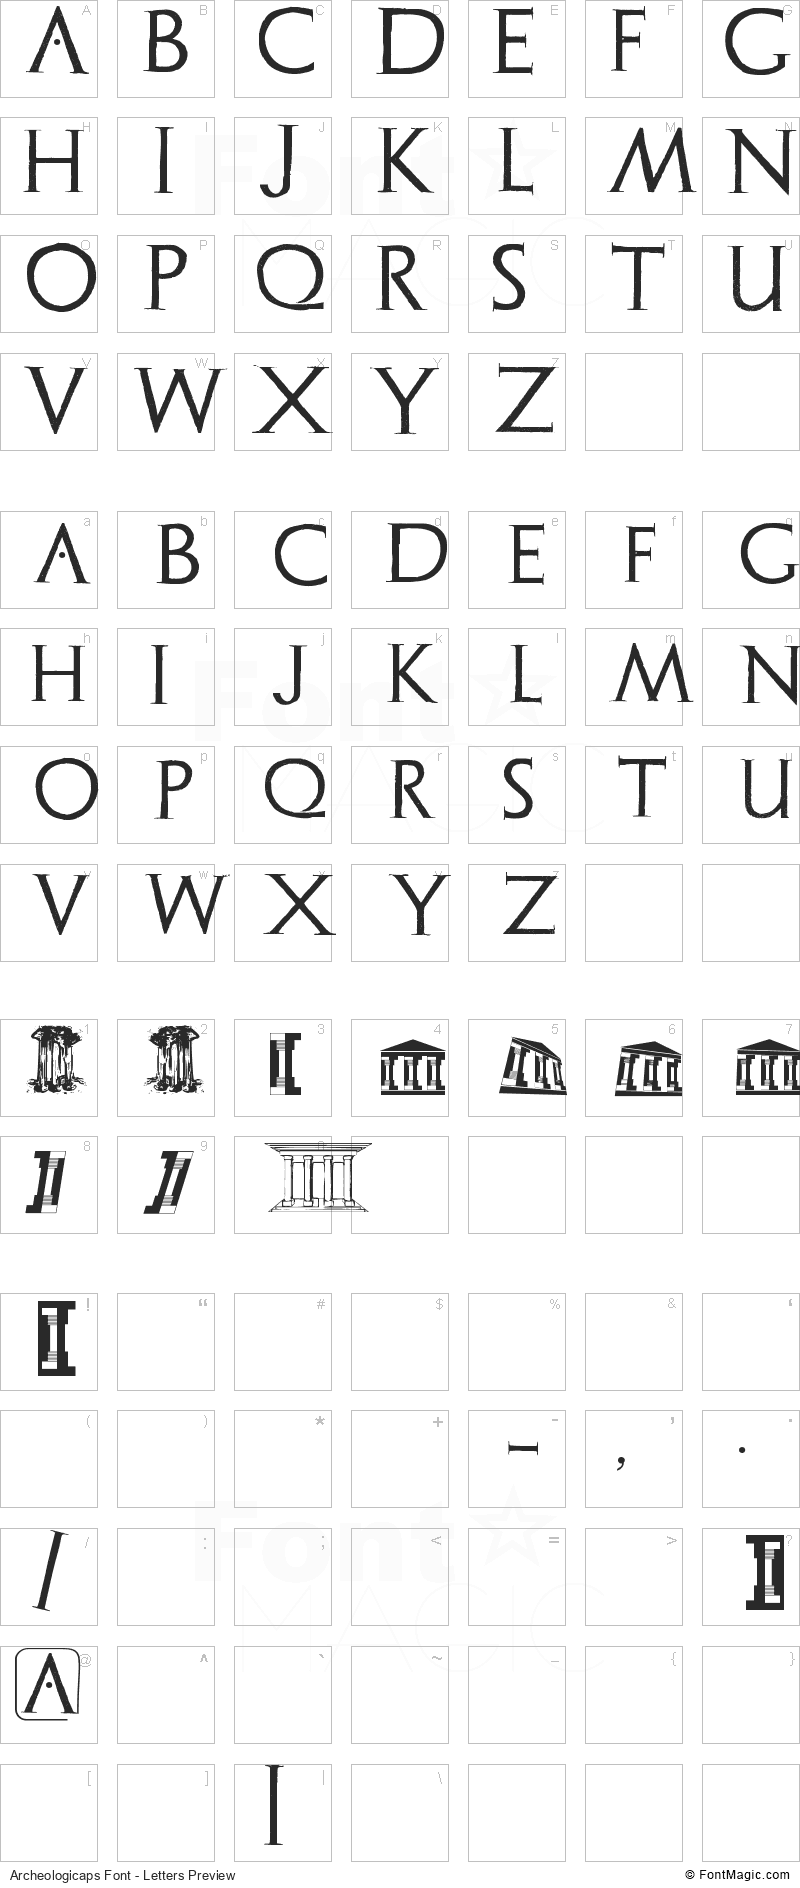 Archeologicaps Font - All Latters Preview Chart